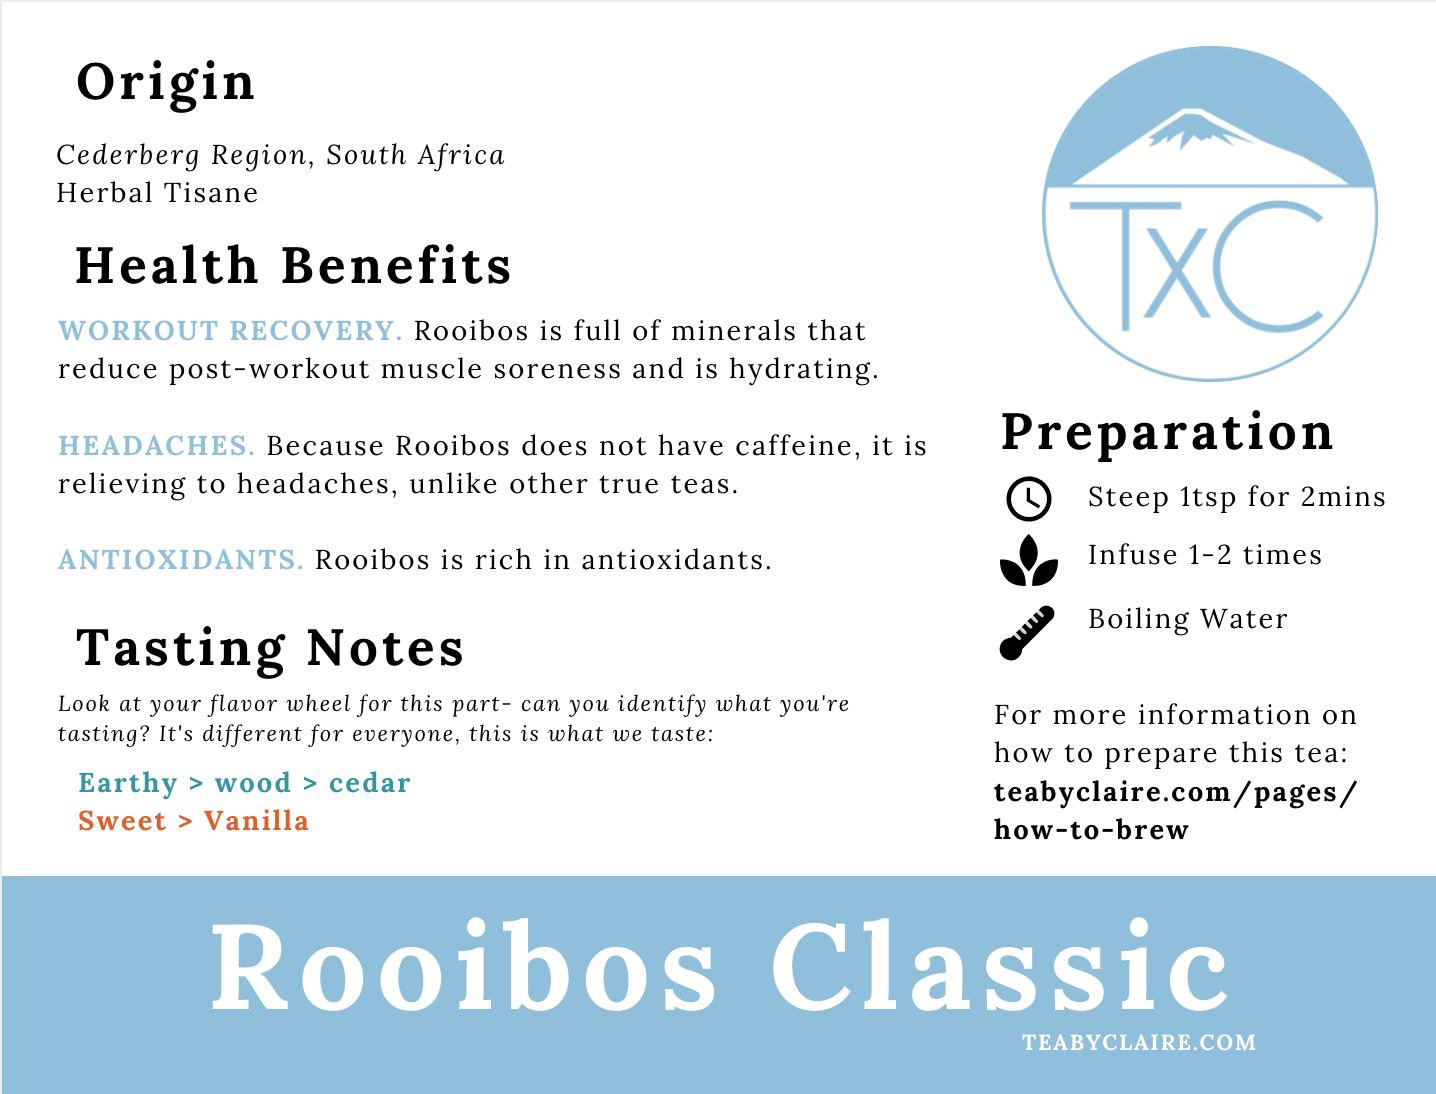 Rooibos Classic